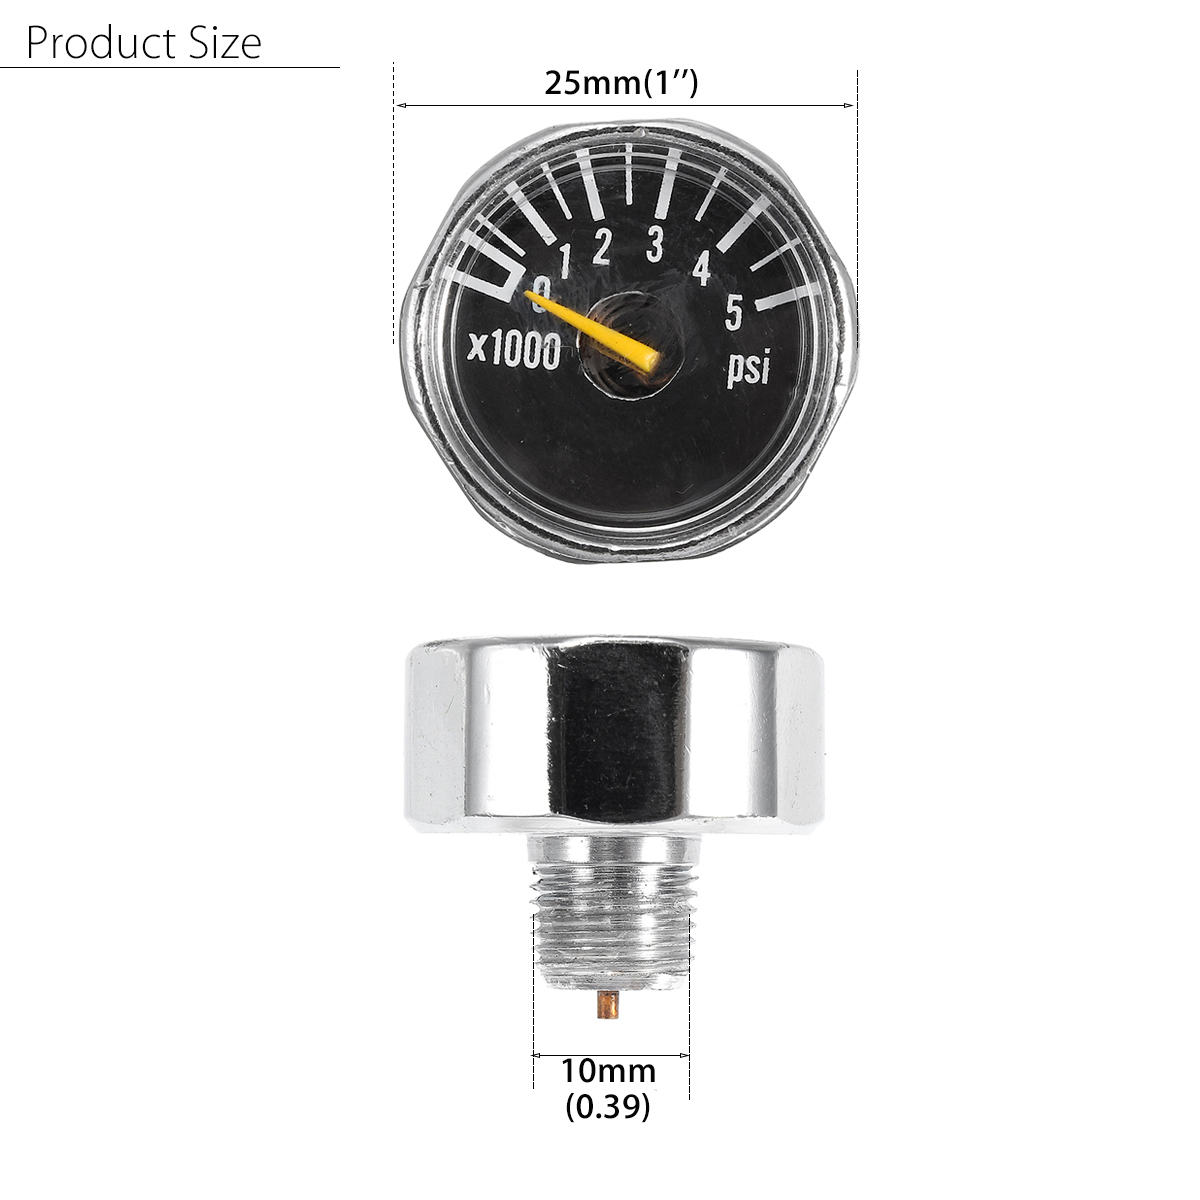 Micro-Gauge-1-inch-25mm-0-to-5000psi-High-Pressure-for-HPA-Paintball-Tank-CO2-PCP-1263873-1